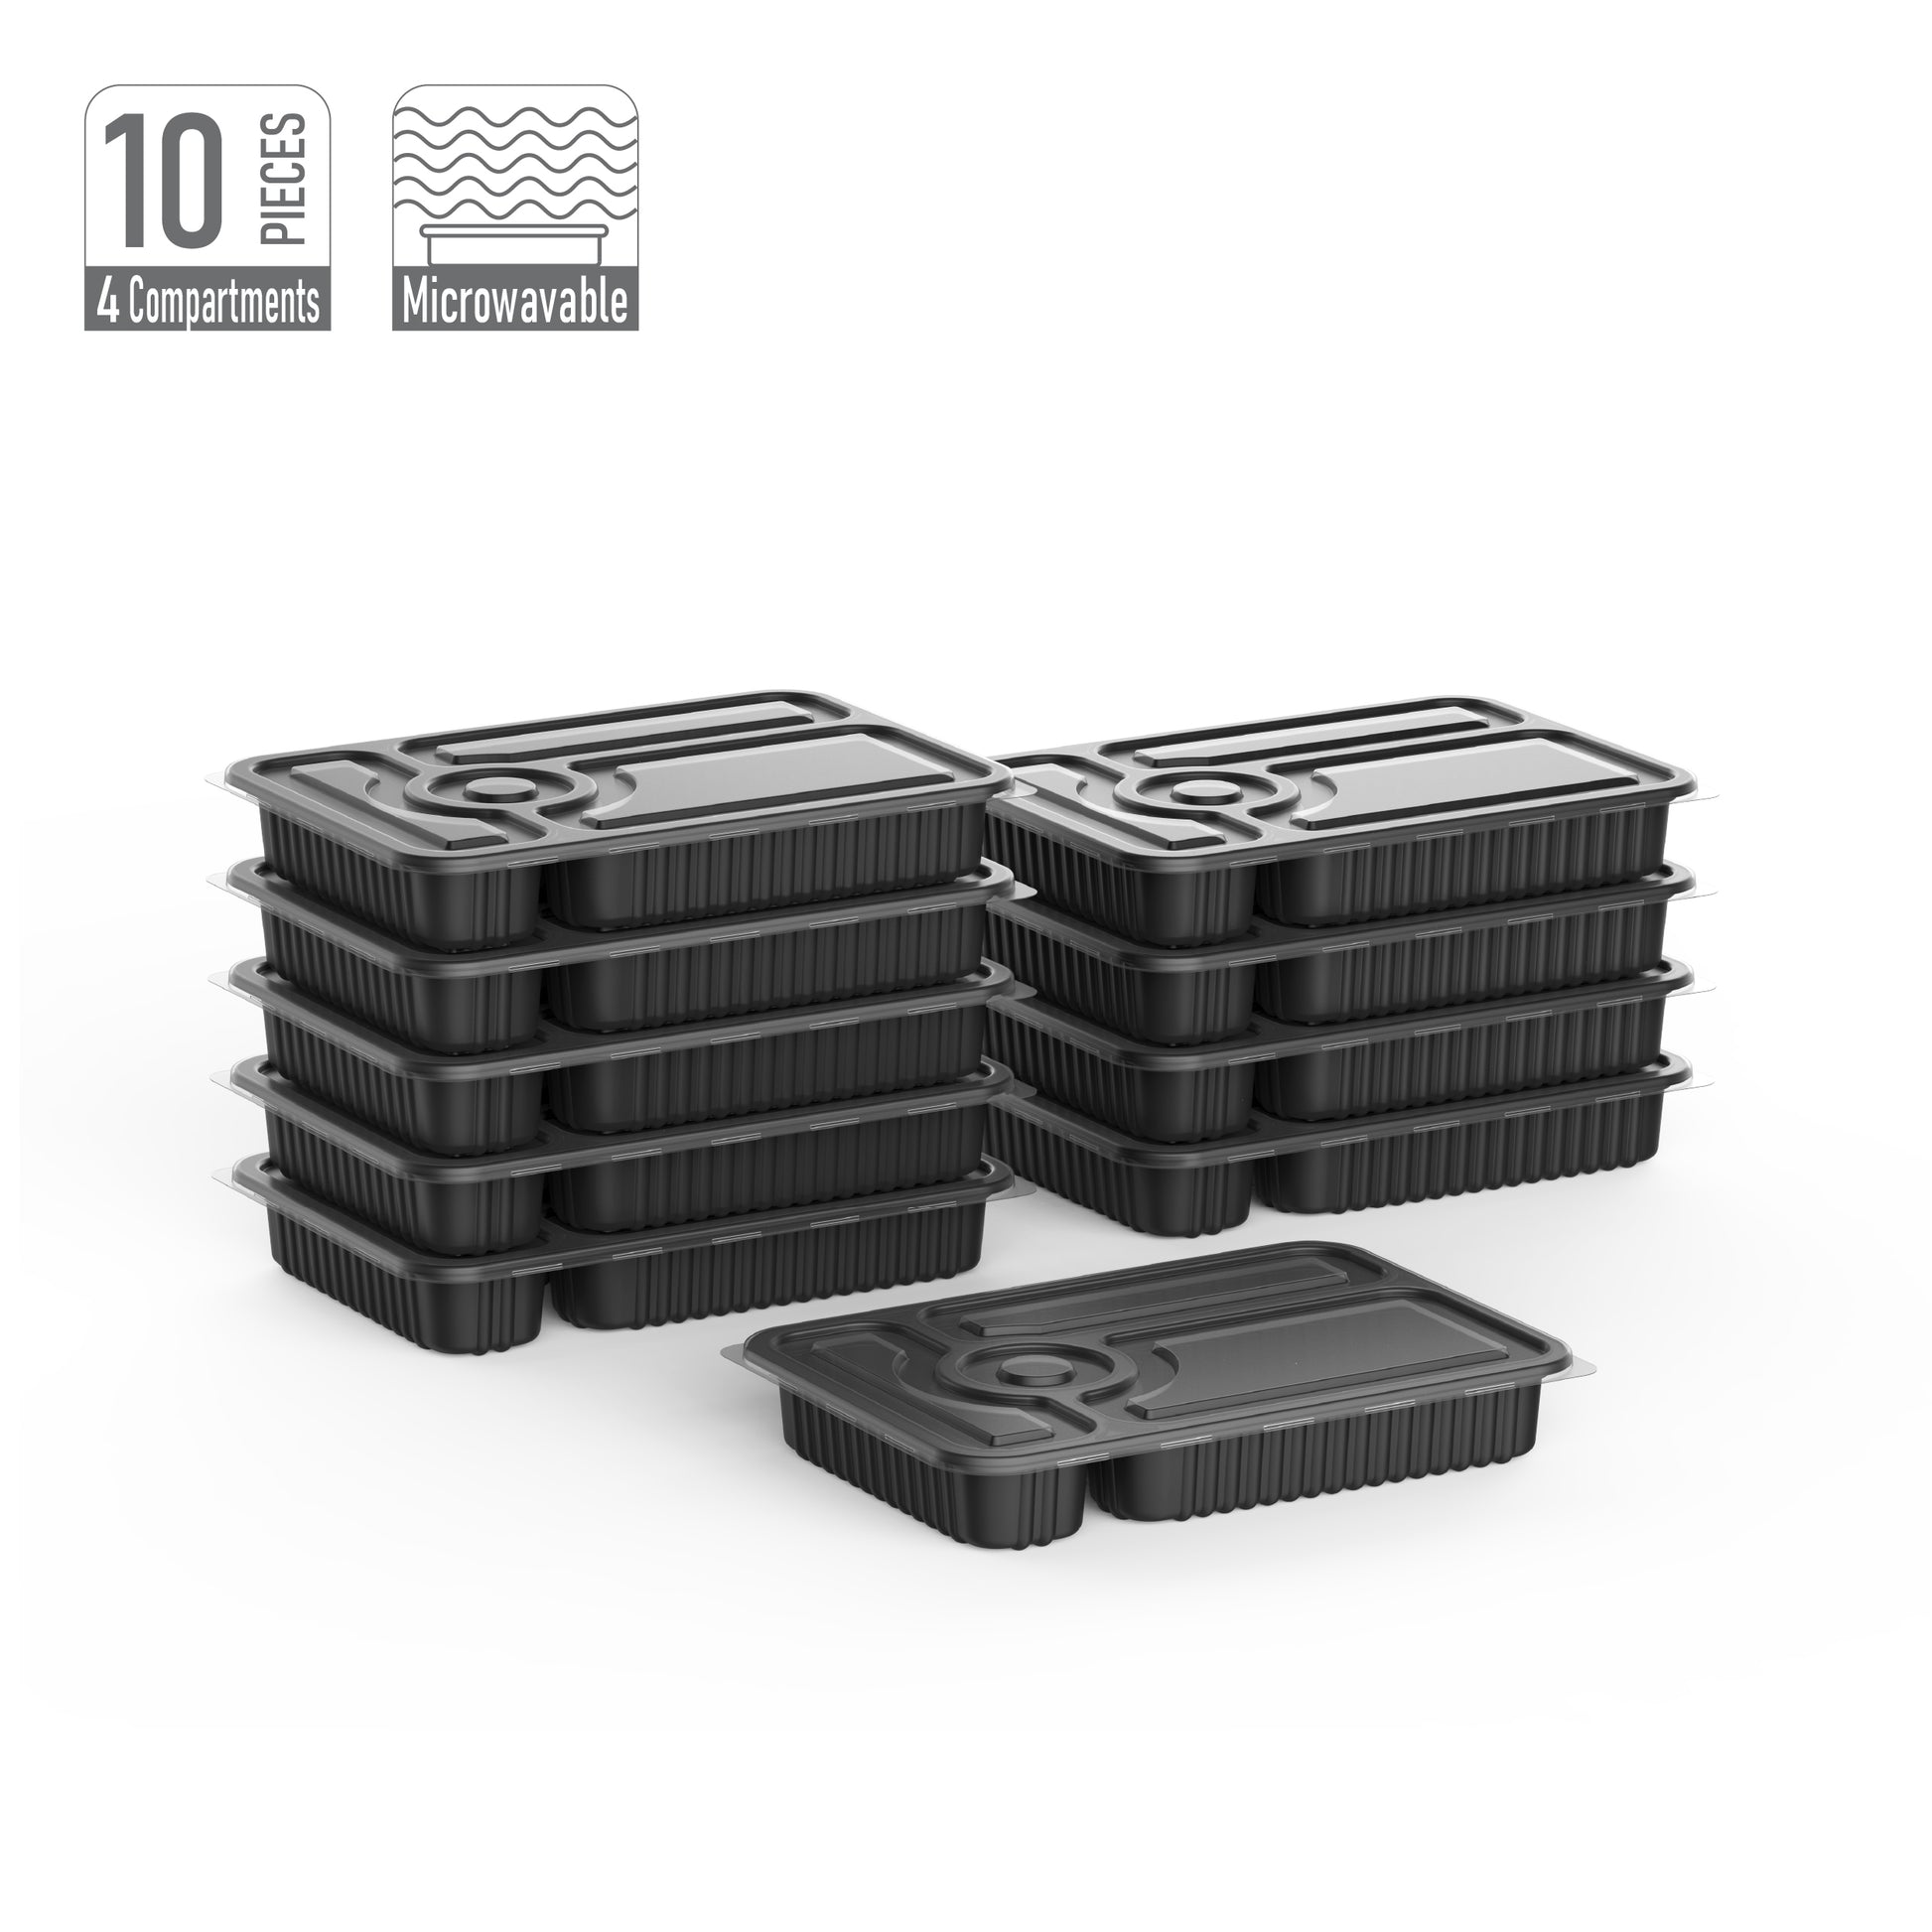 4 Compartments Pack of 10 Black Meal Containers with Clear Lids